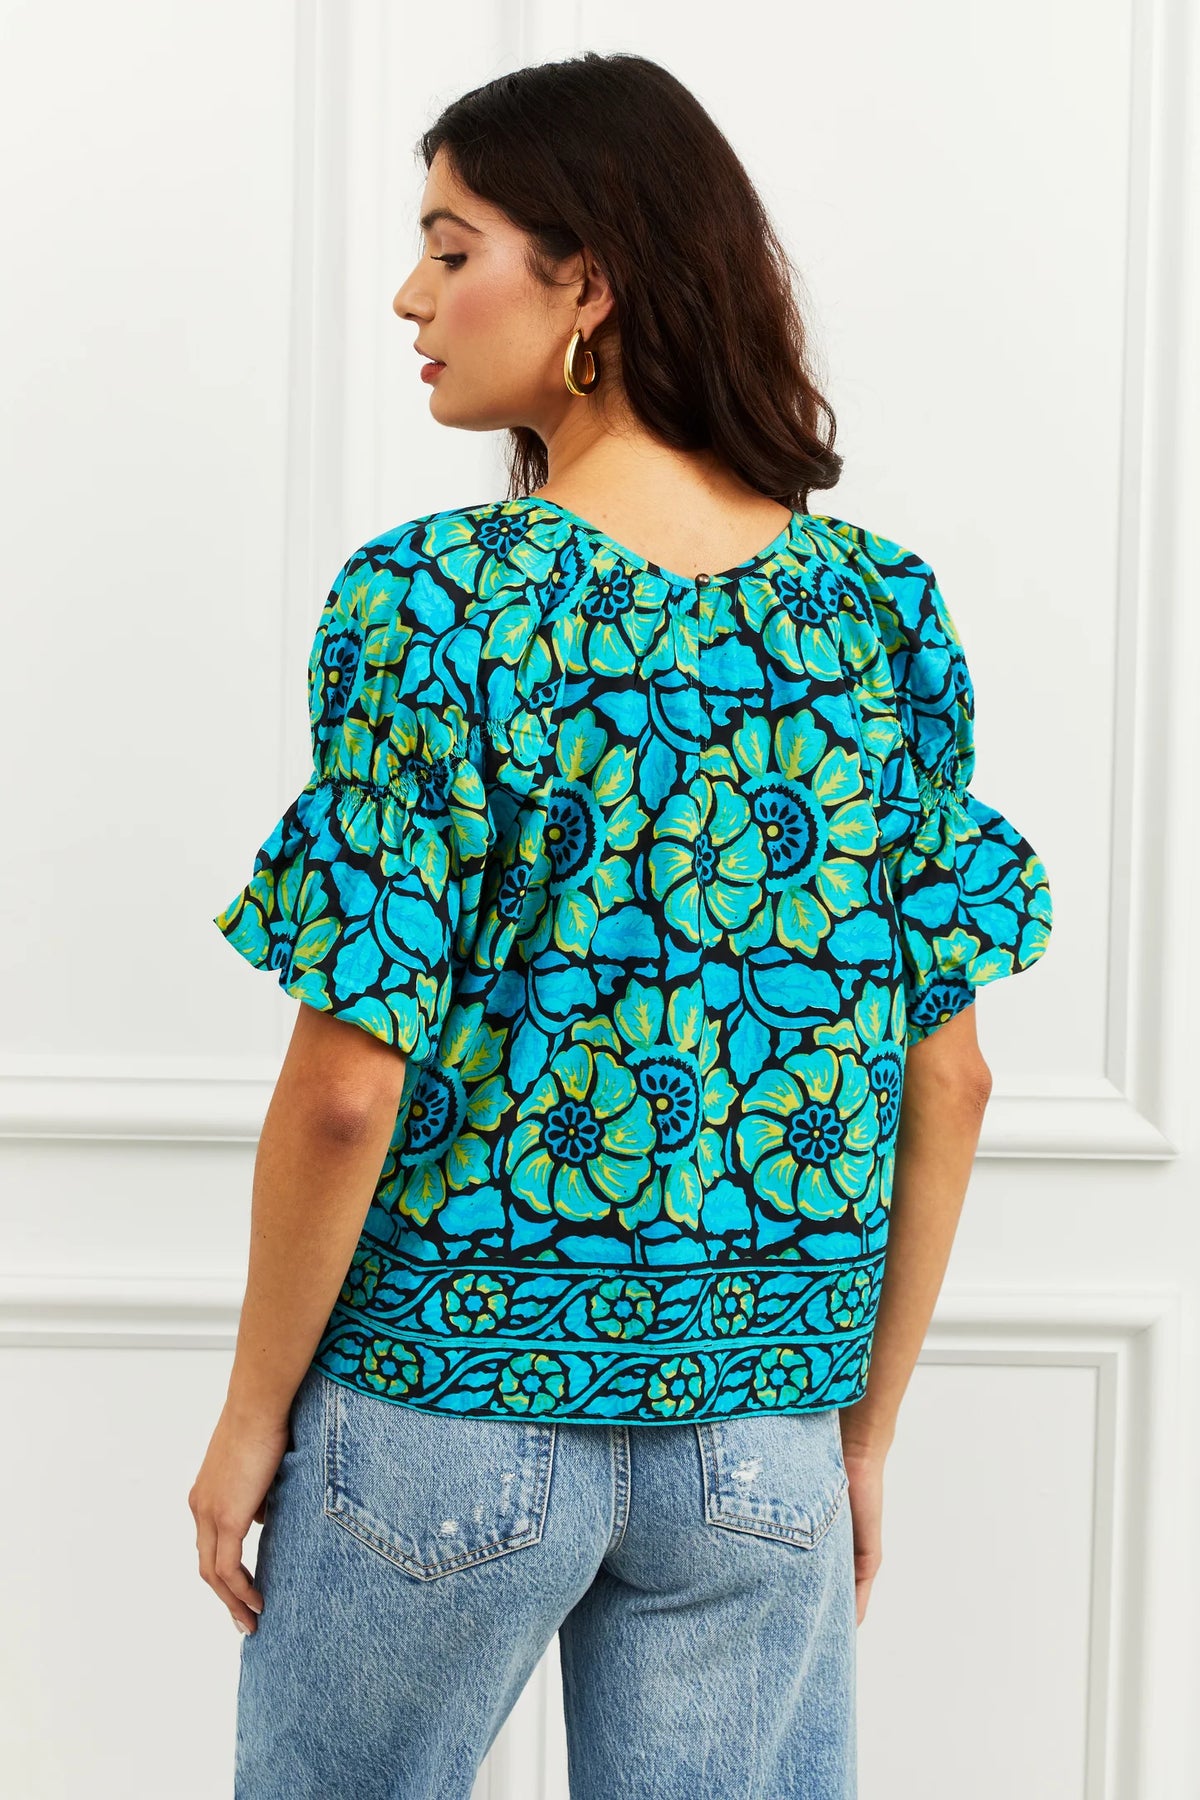 Maeve Top in Shania Turquoise Print